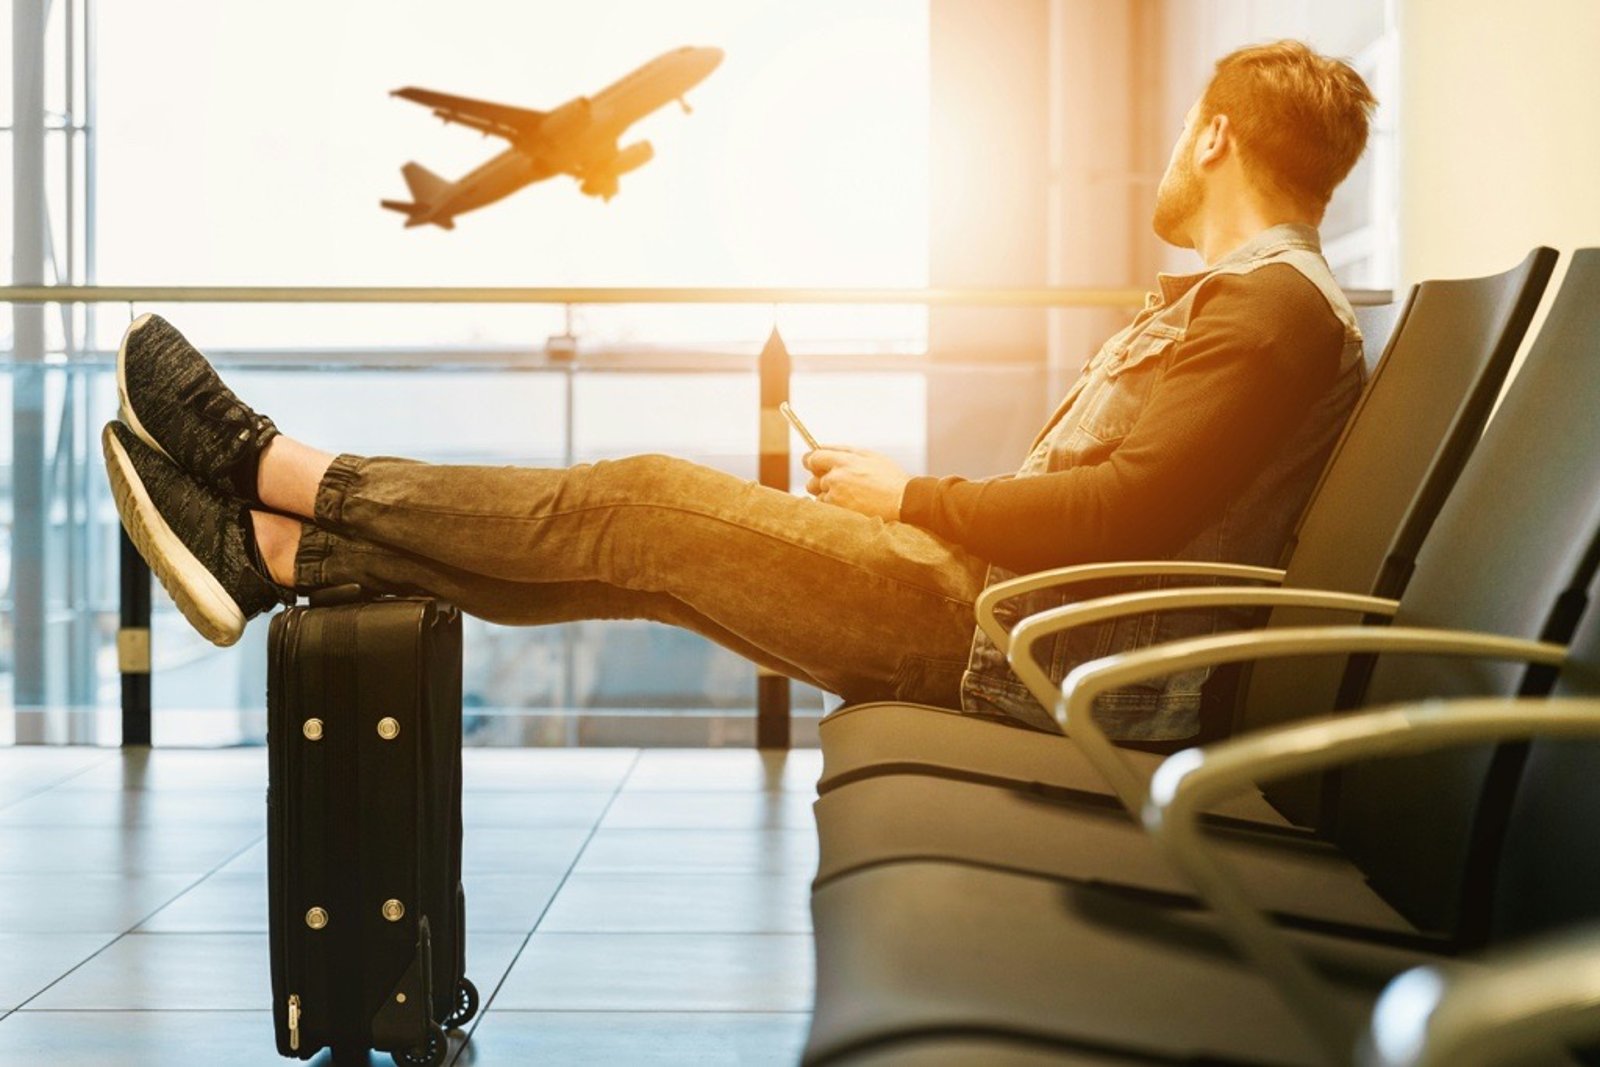 FlyEasy Benefit (Free Airport Lounge Access) 